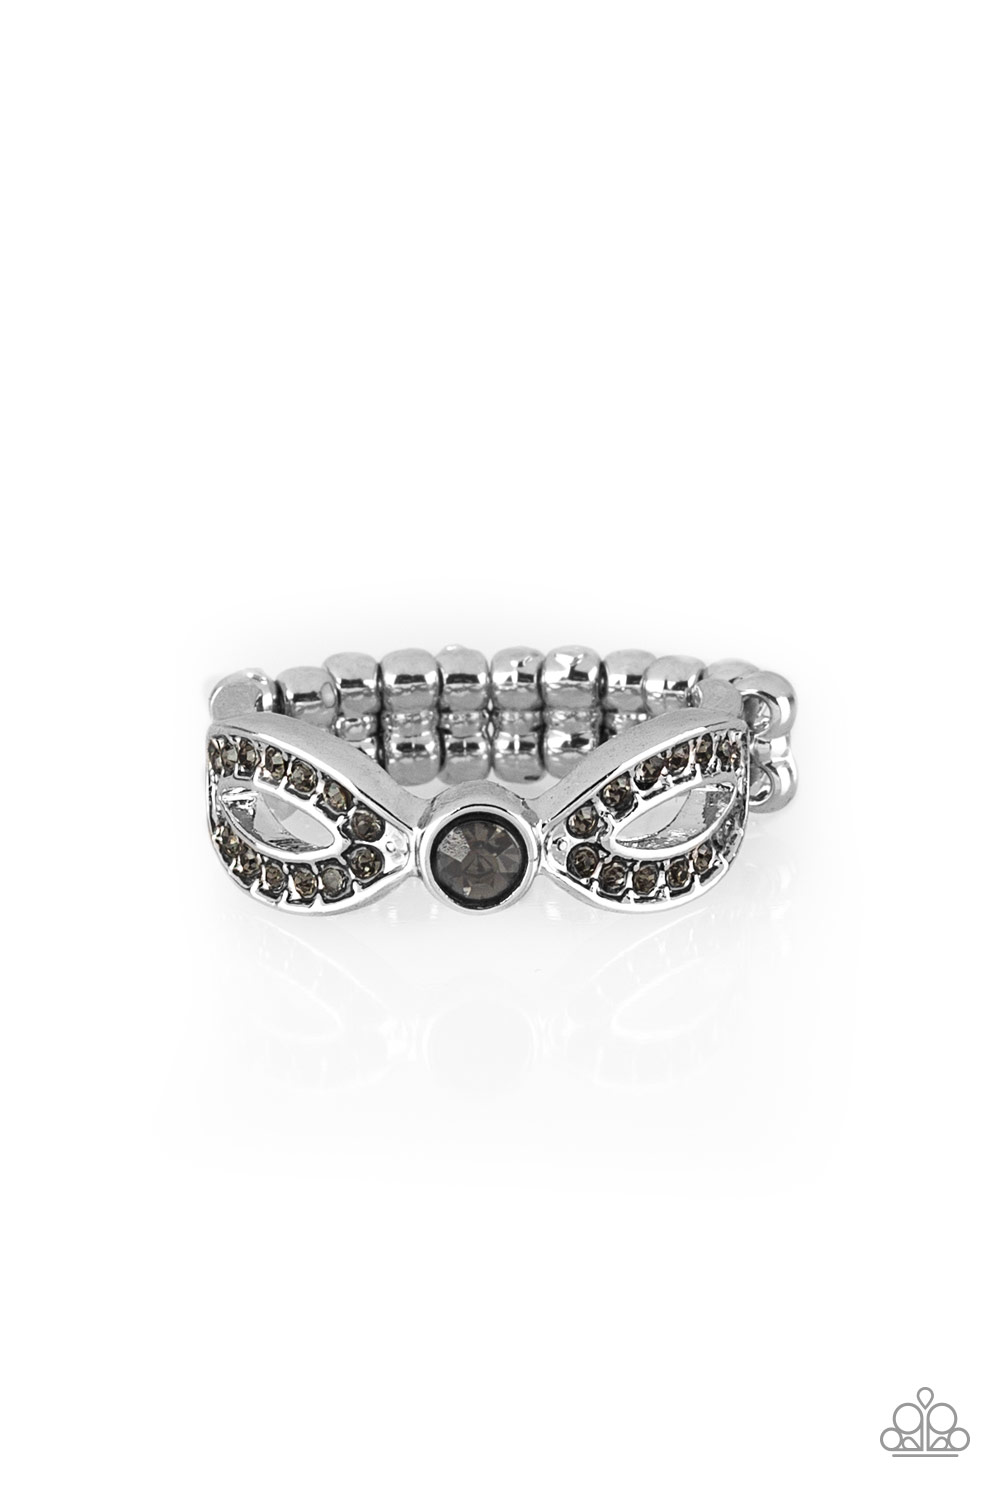 Paparazzi Accessories: Extra Side Of Elegance - Silver | Paparazzi ...